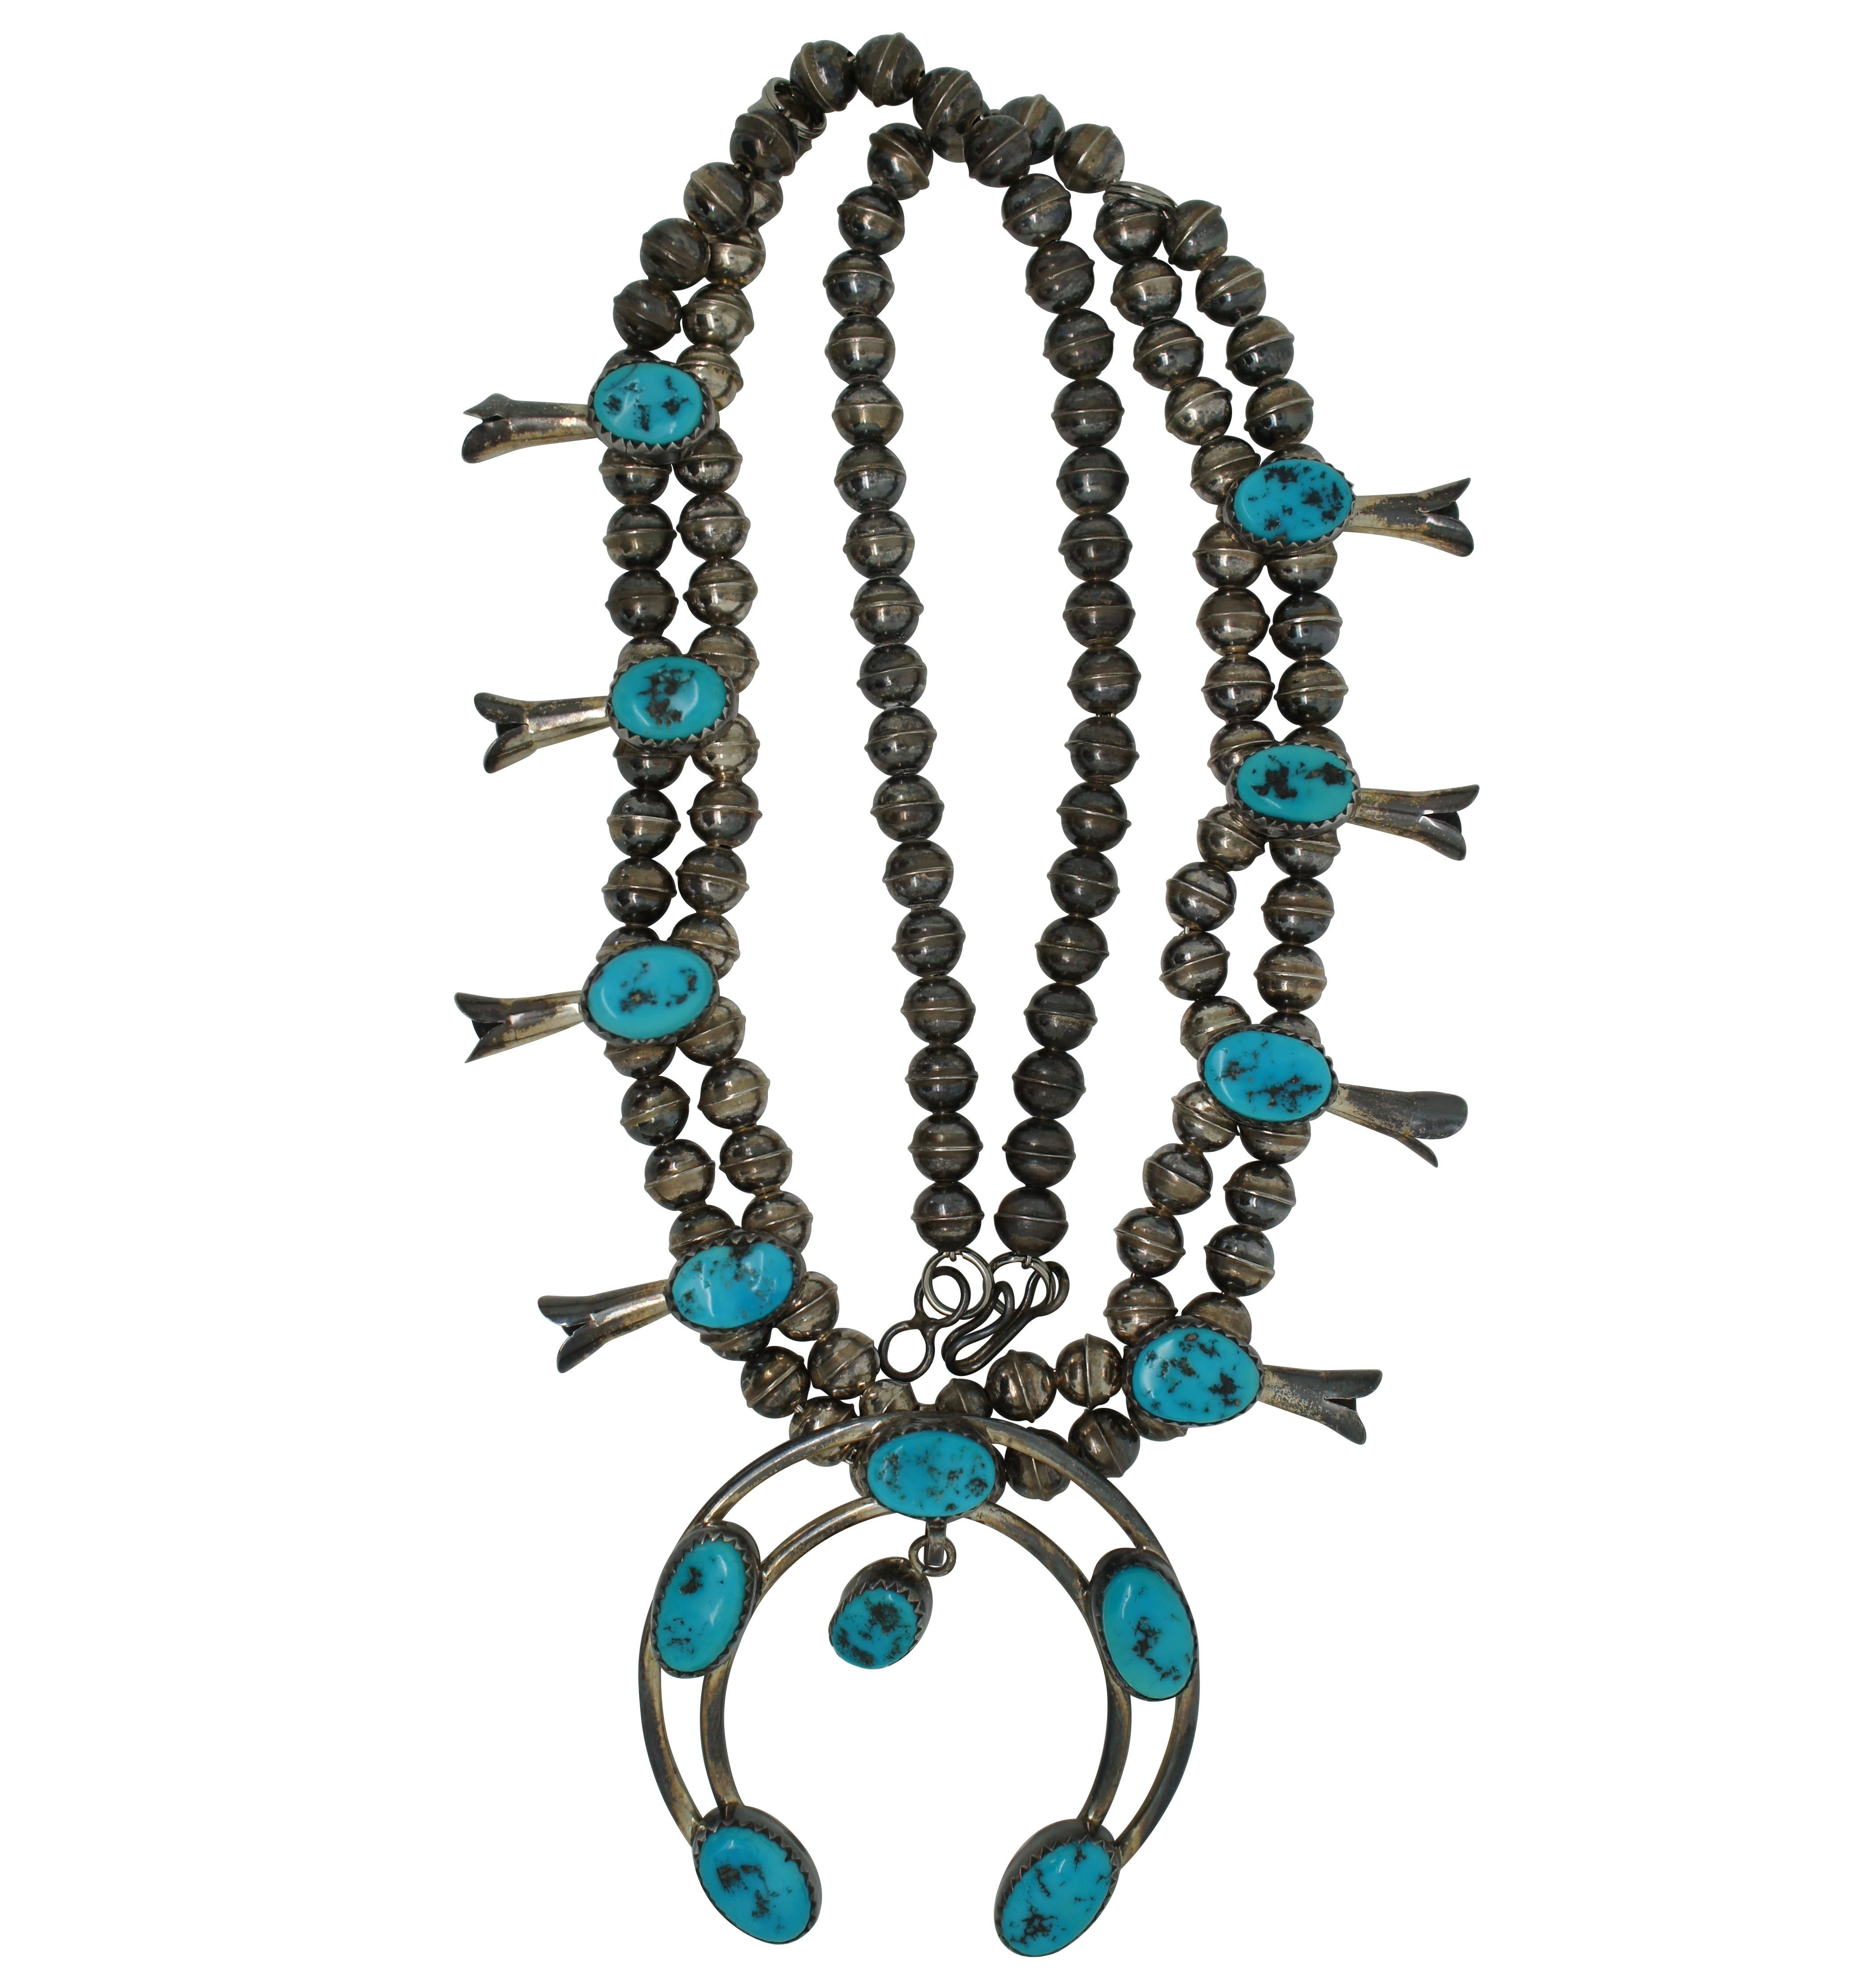 Vintage sterling silver and turquoise necklace featuring a double beaded chain accented with eight oval stones and squash blossom shaped drops, and a crescent moon shaped pendant set with five stones plus one dangling from the center. Paired with